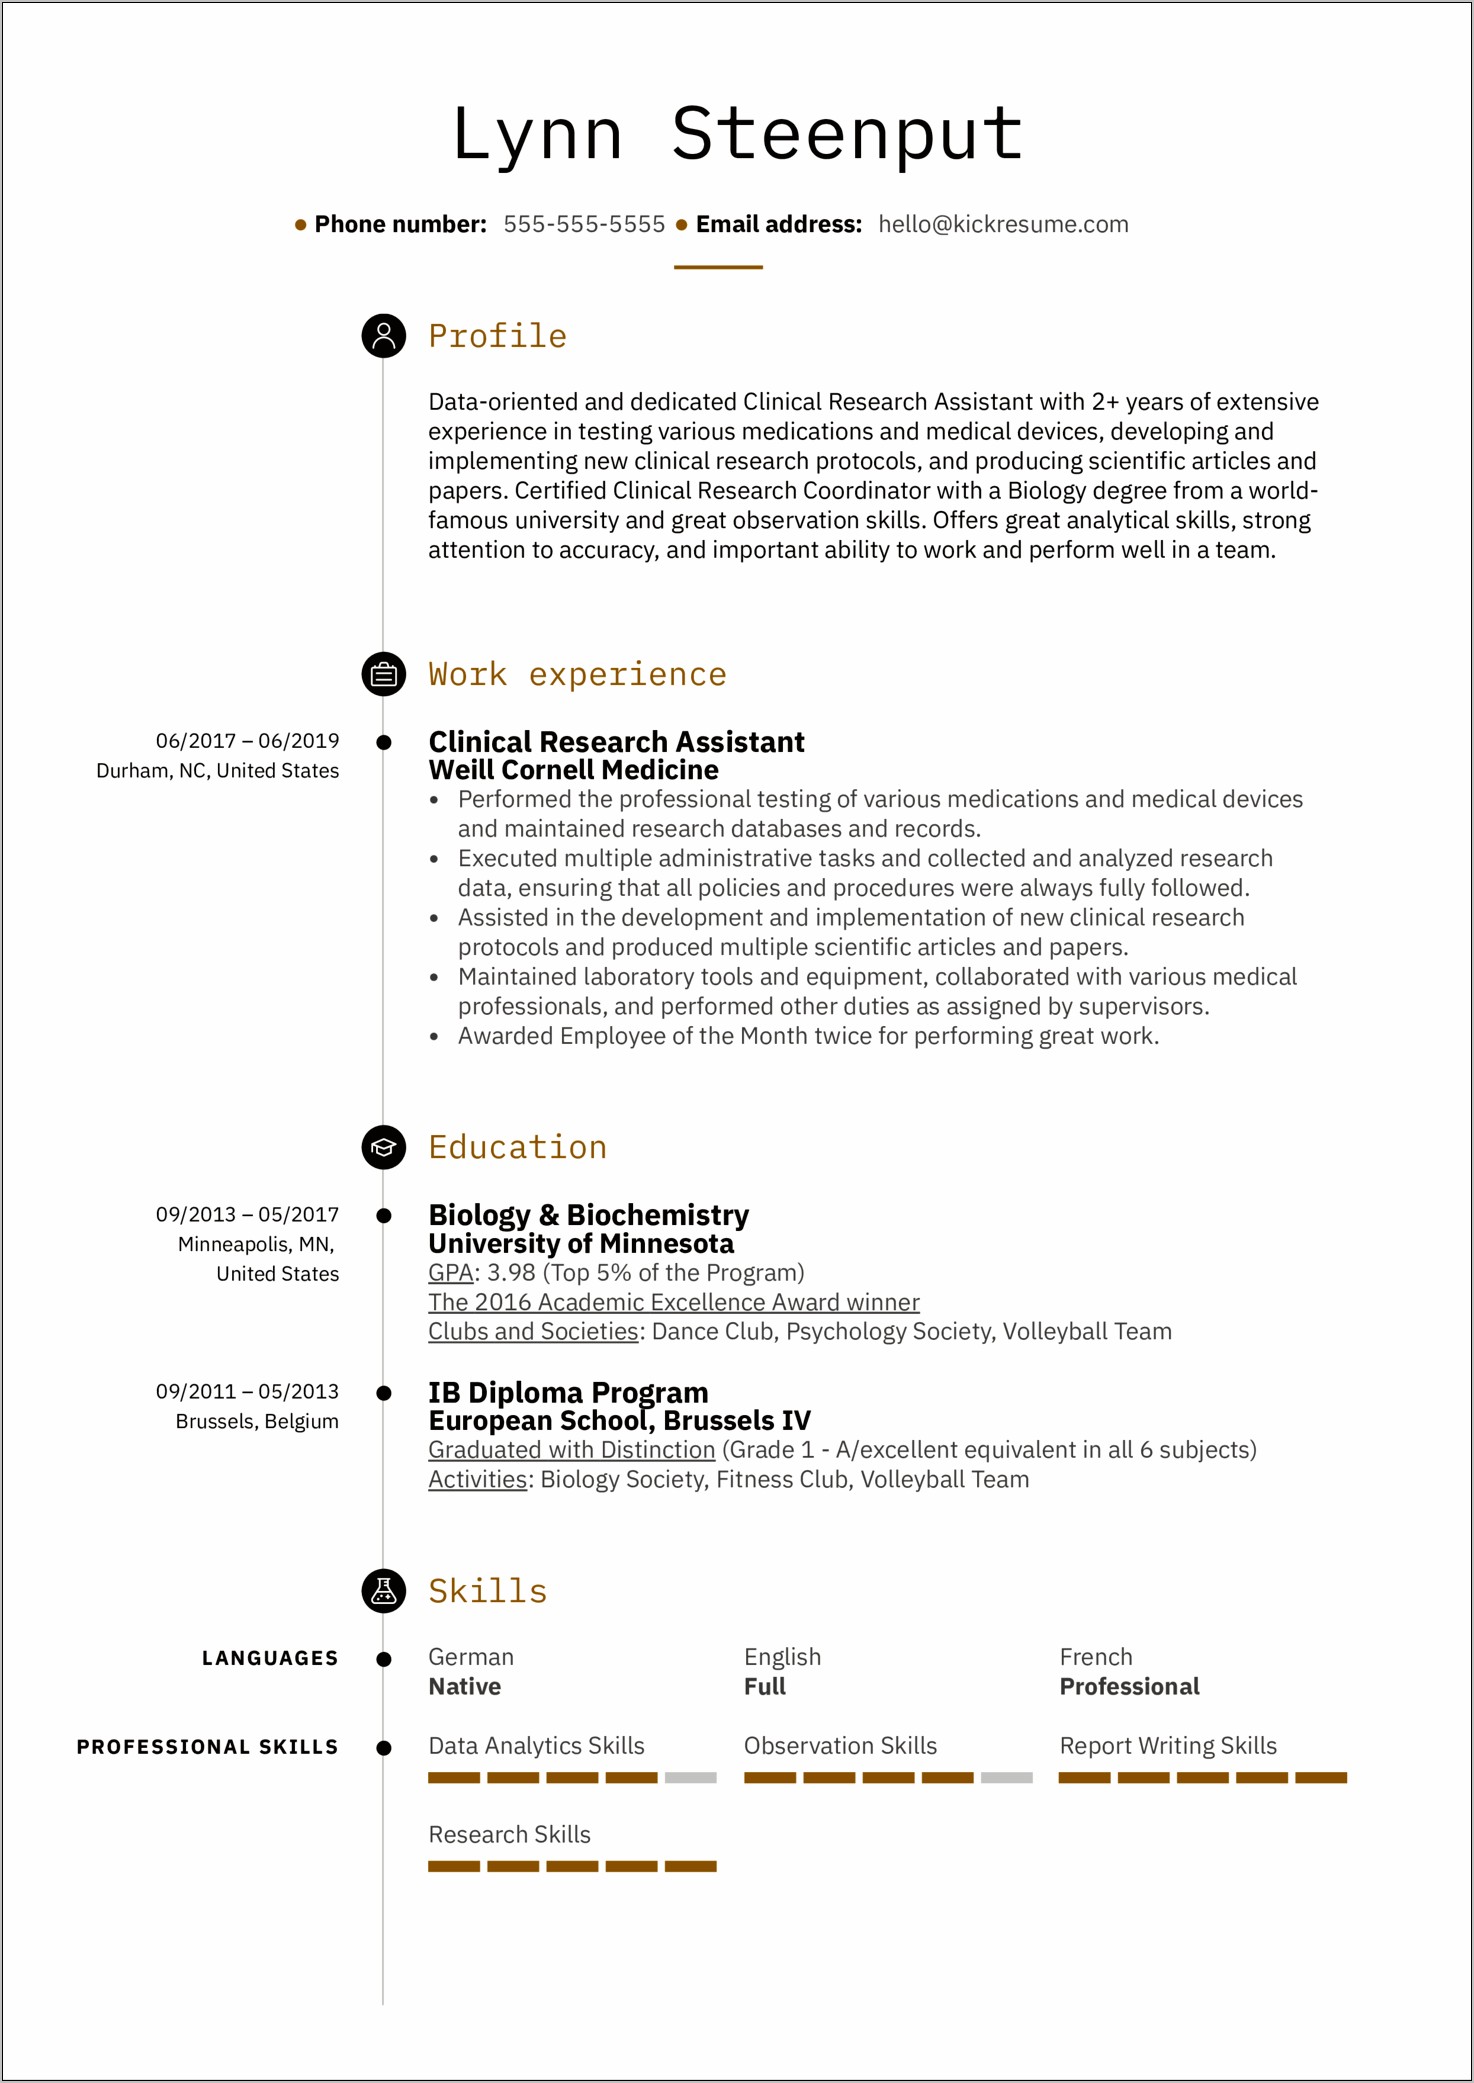 Resume Sample Medical Assistant No Experience